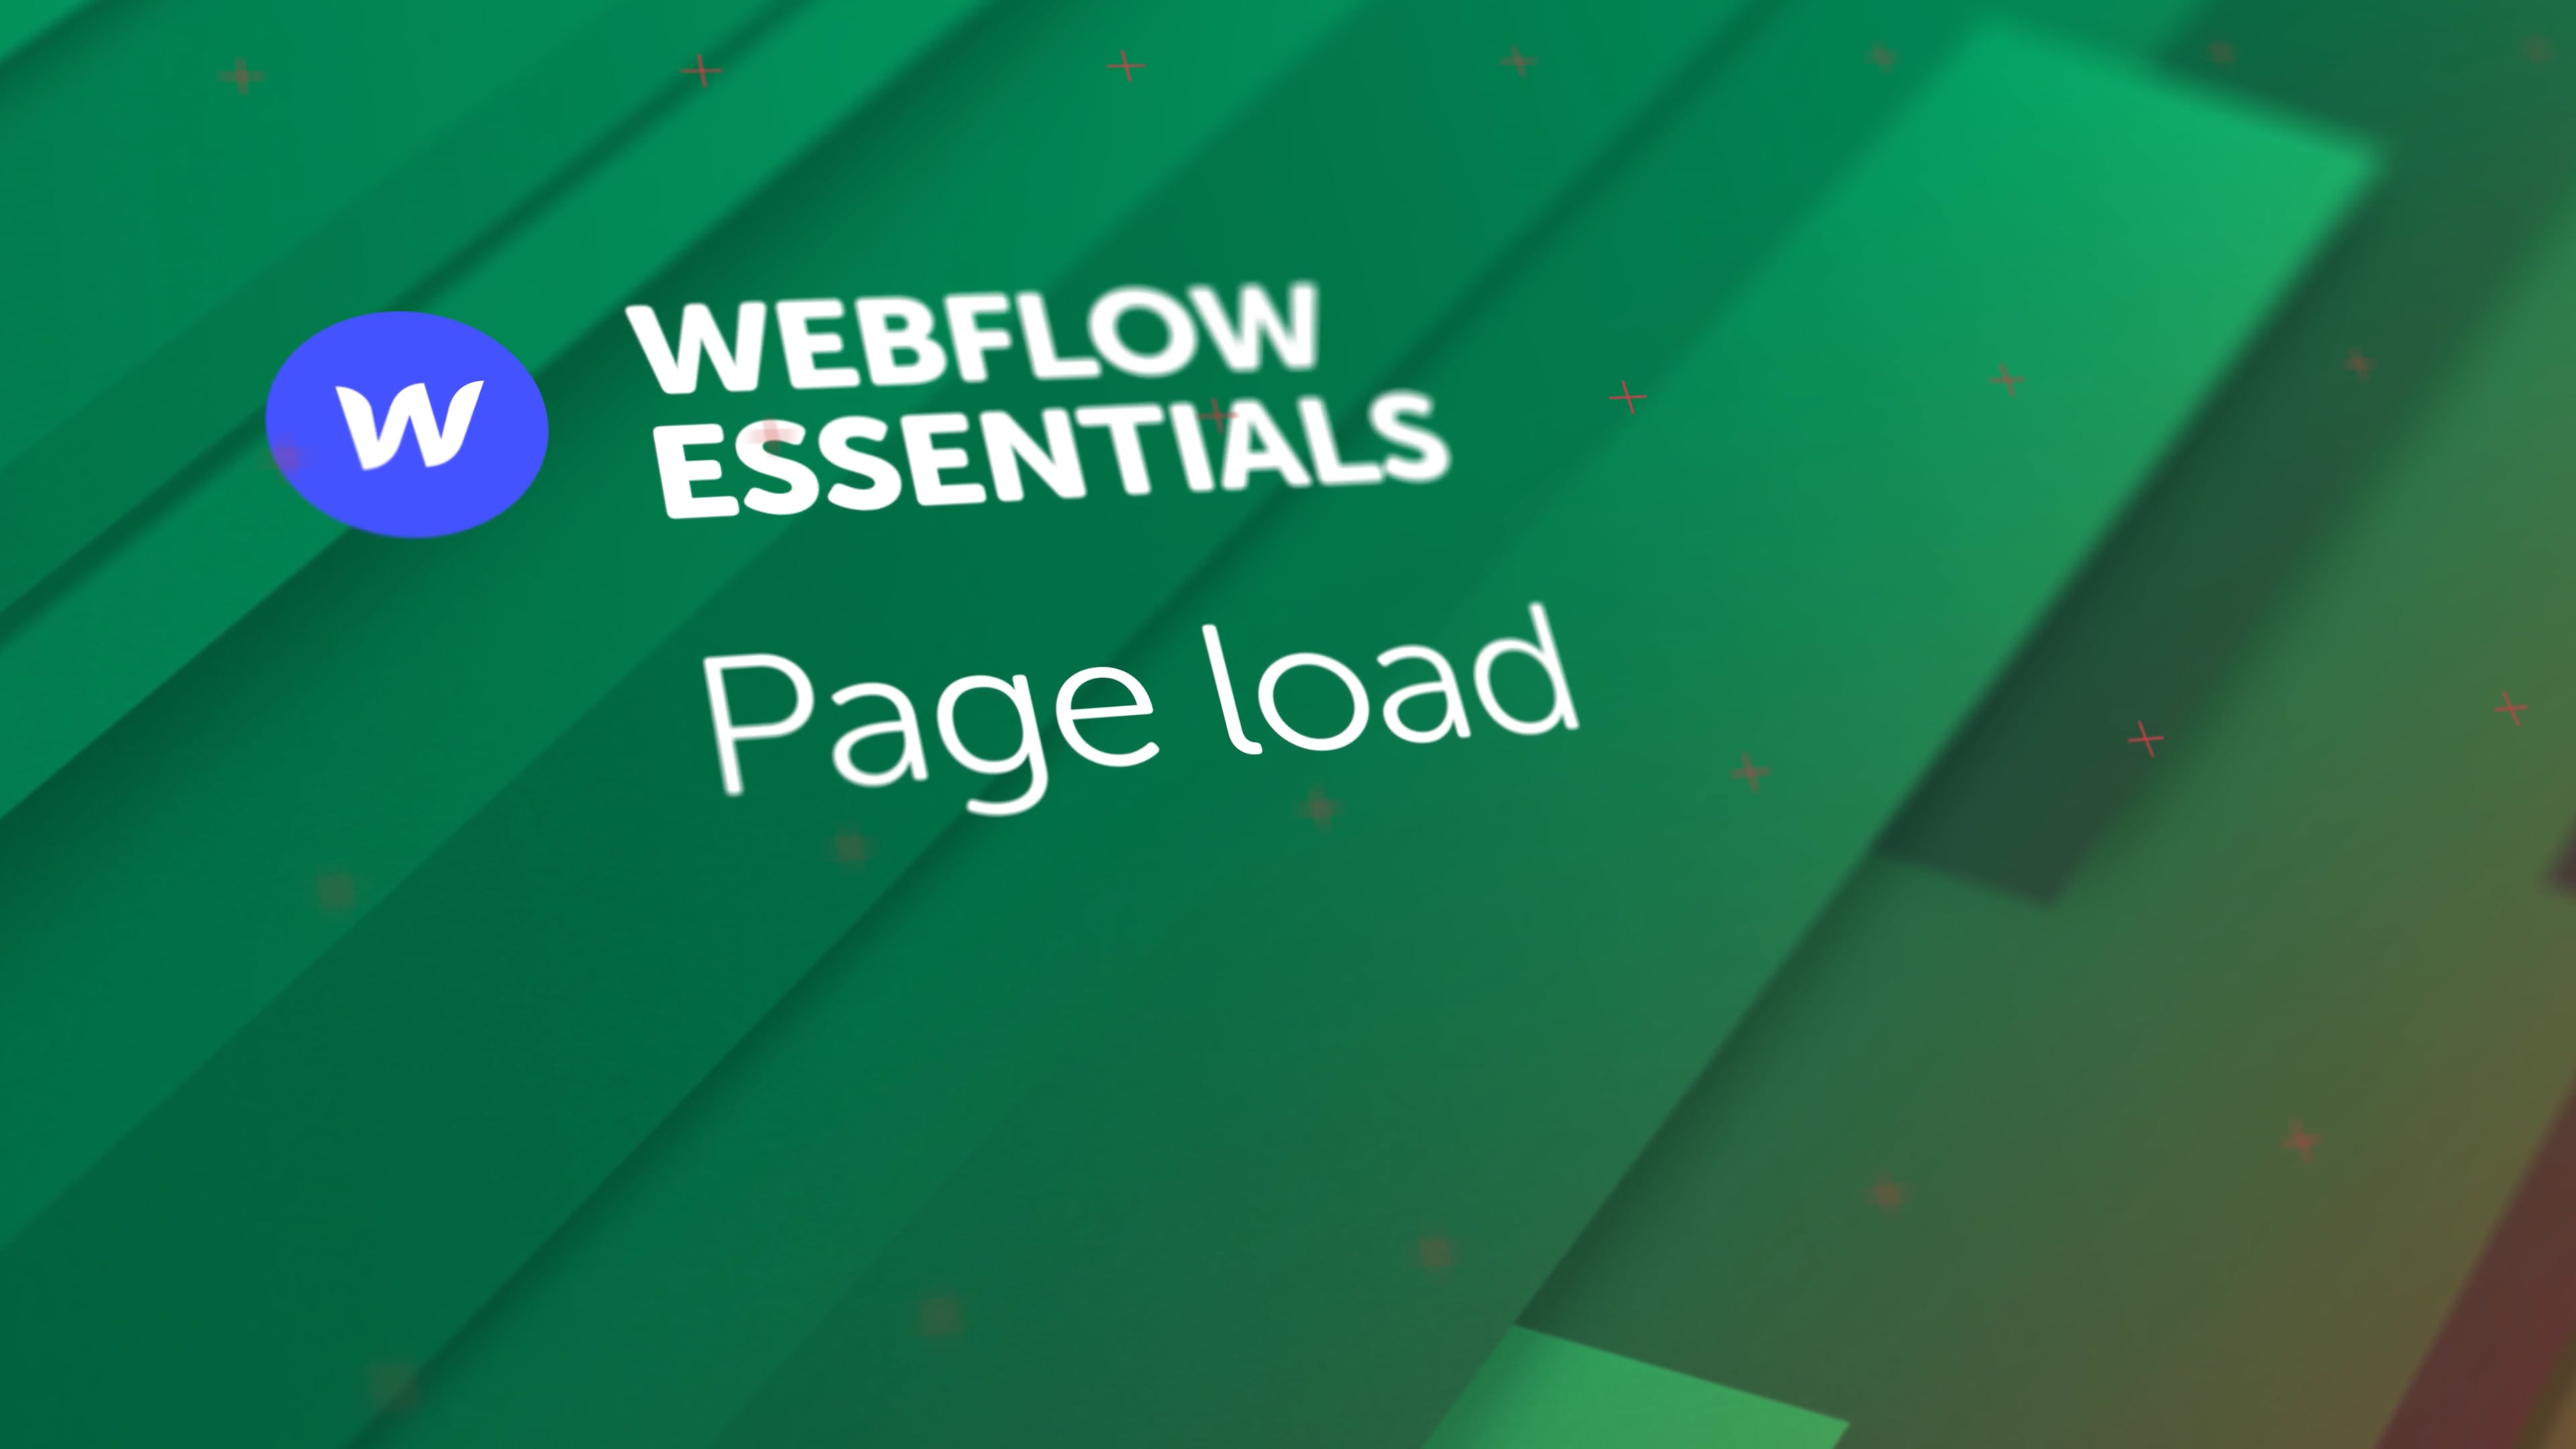 How to create a page load animation in Webflow | Bring Your Own Laptop